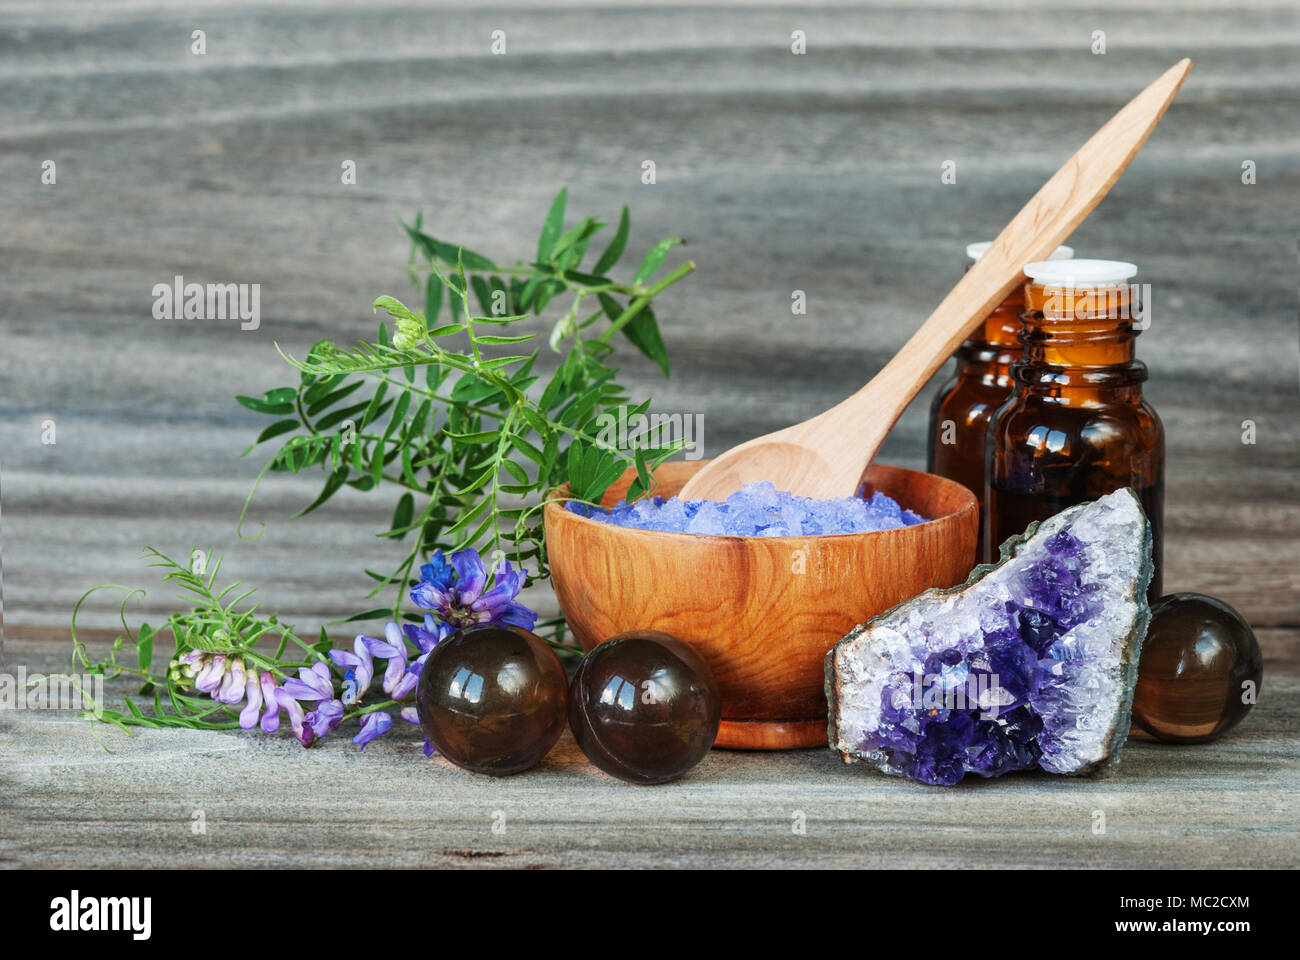 Spa concept. Salt for baths, bottles with essential oils, stone amesist and blue flowers on an old wooden background Stock Photo